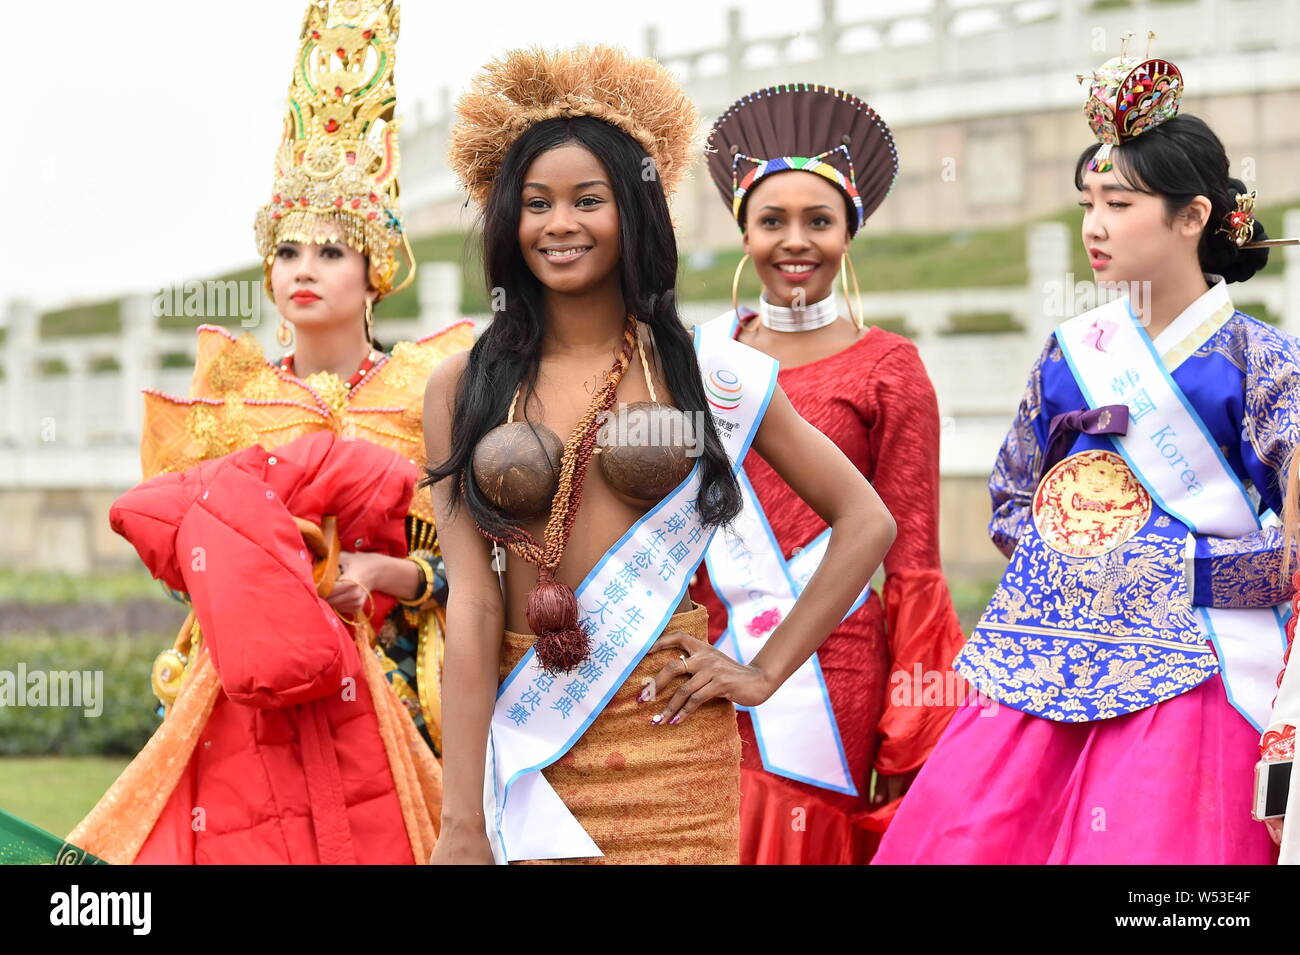 Contestants dressed in traditional costumes take part in an outdoor photo session for the 53th Miss All Nationsl Pageant in Nanjing city, east China's Stock Photo